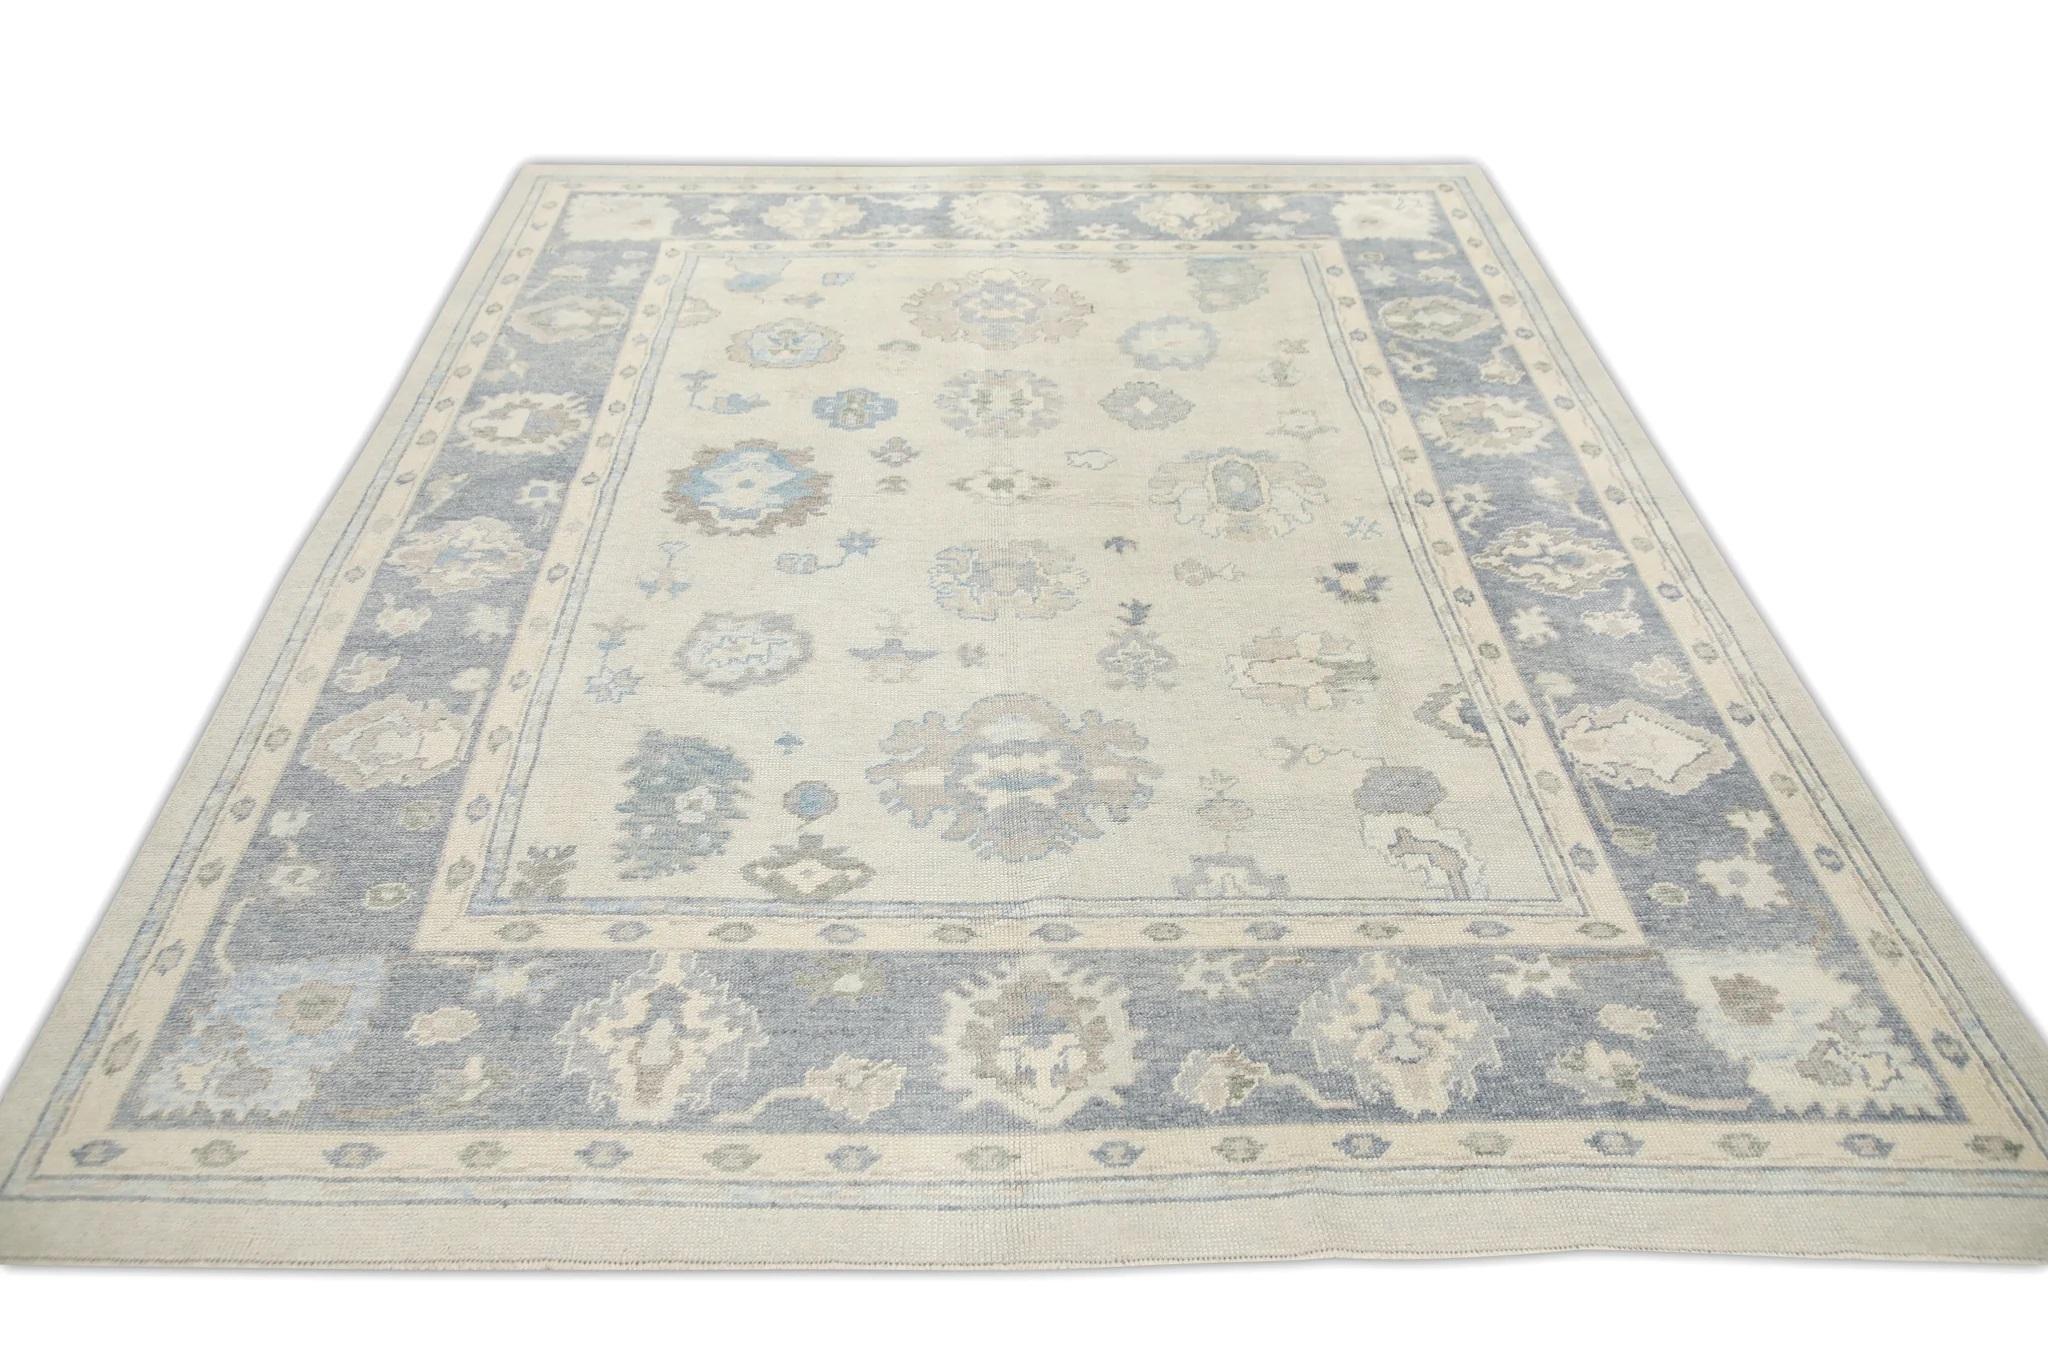 Contemporary Cream Handwoven Wool Turkish Oushak Rug in Blue Floral Design 8'3